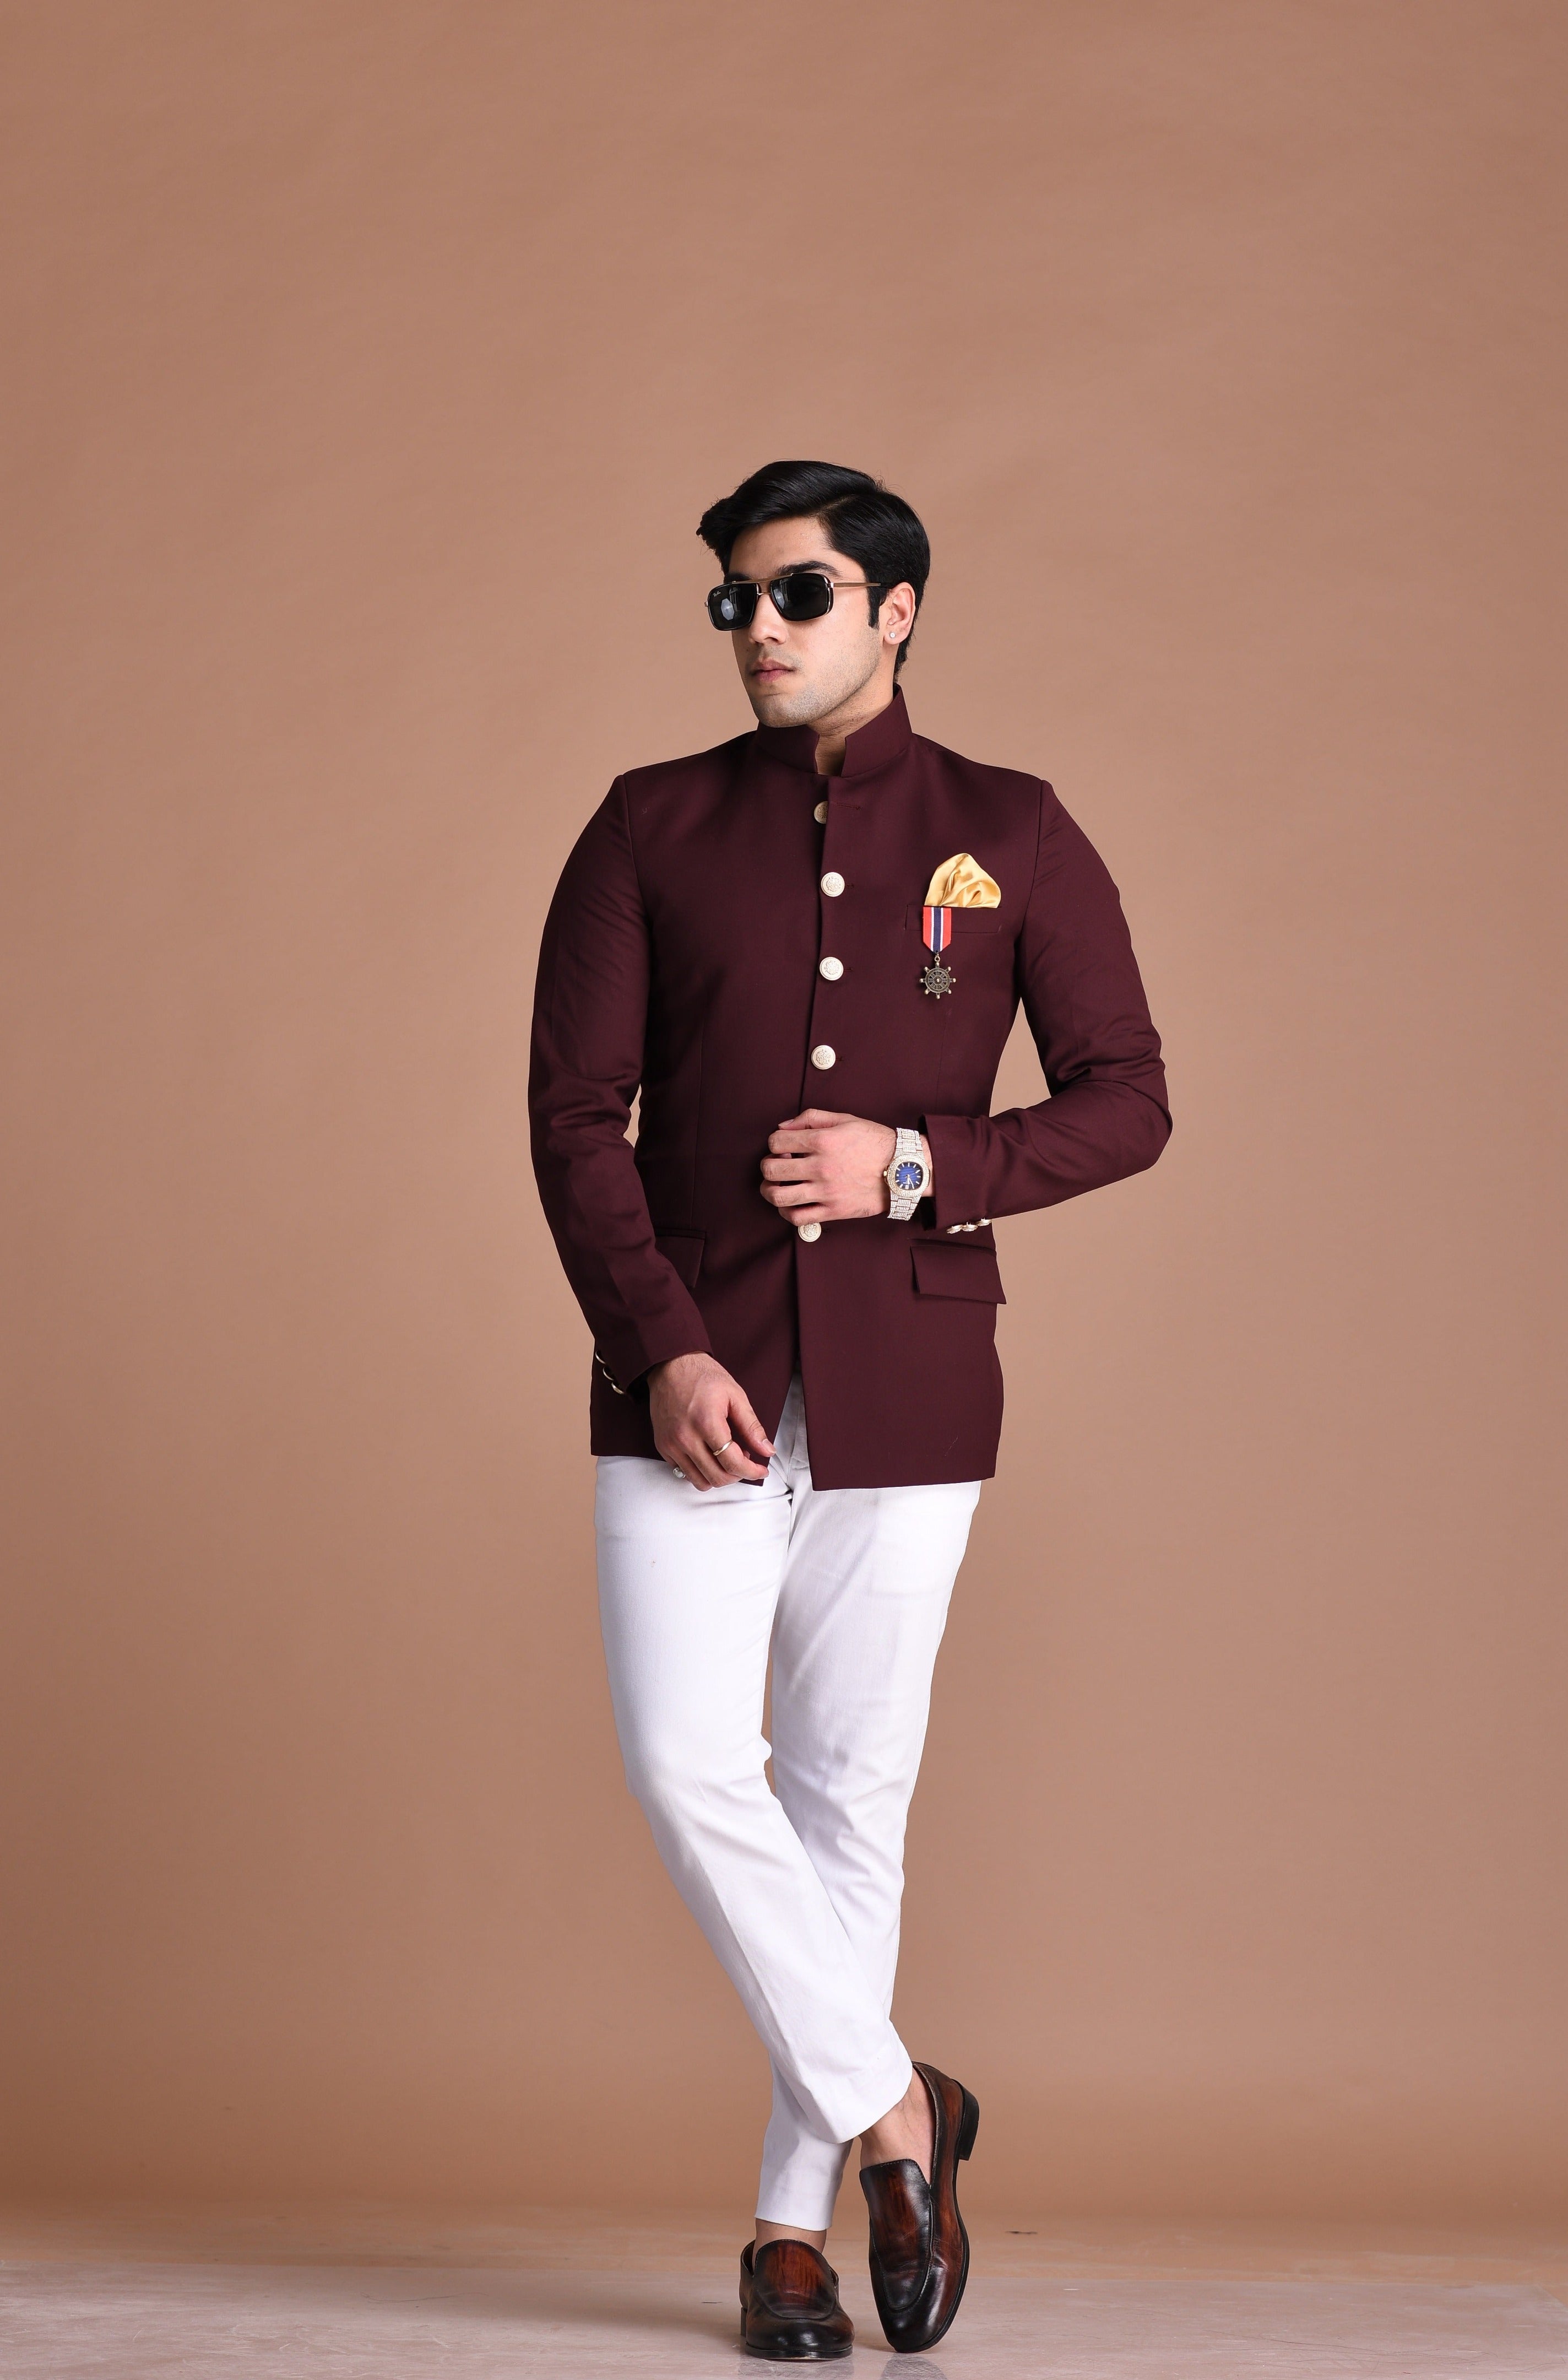 Elegant Wine Jodhpuri Bandhgala  with White Trouser| Partywear for Grooms and Friends | Wedding Functions | Open Lawn Party